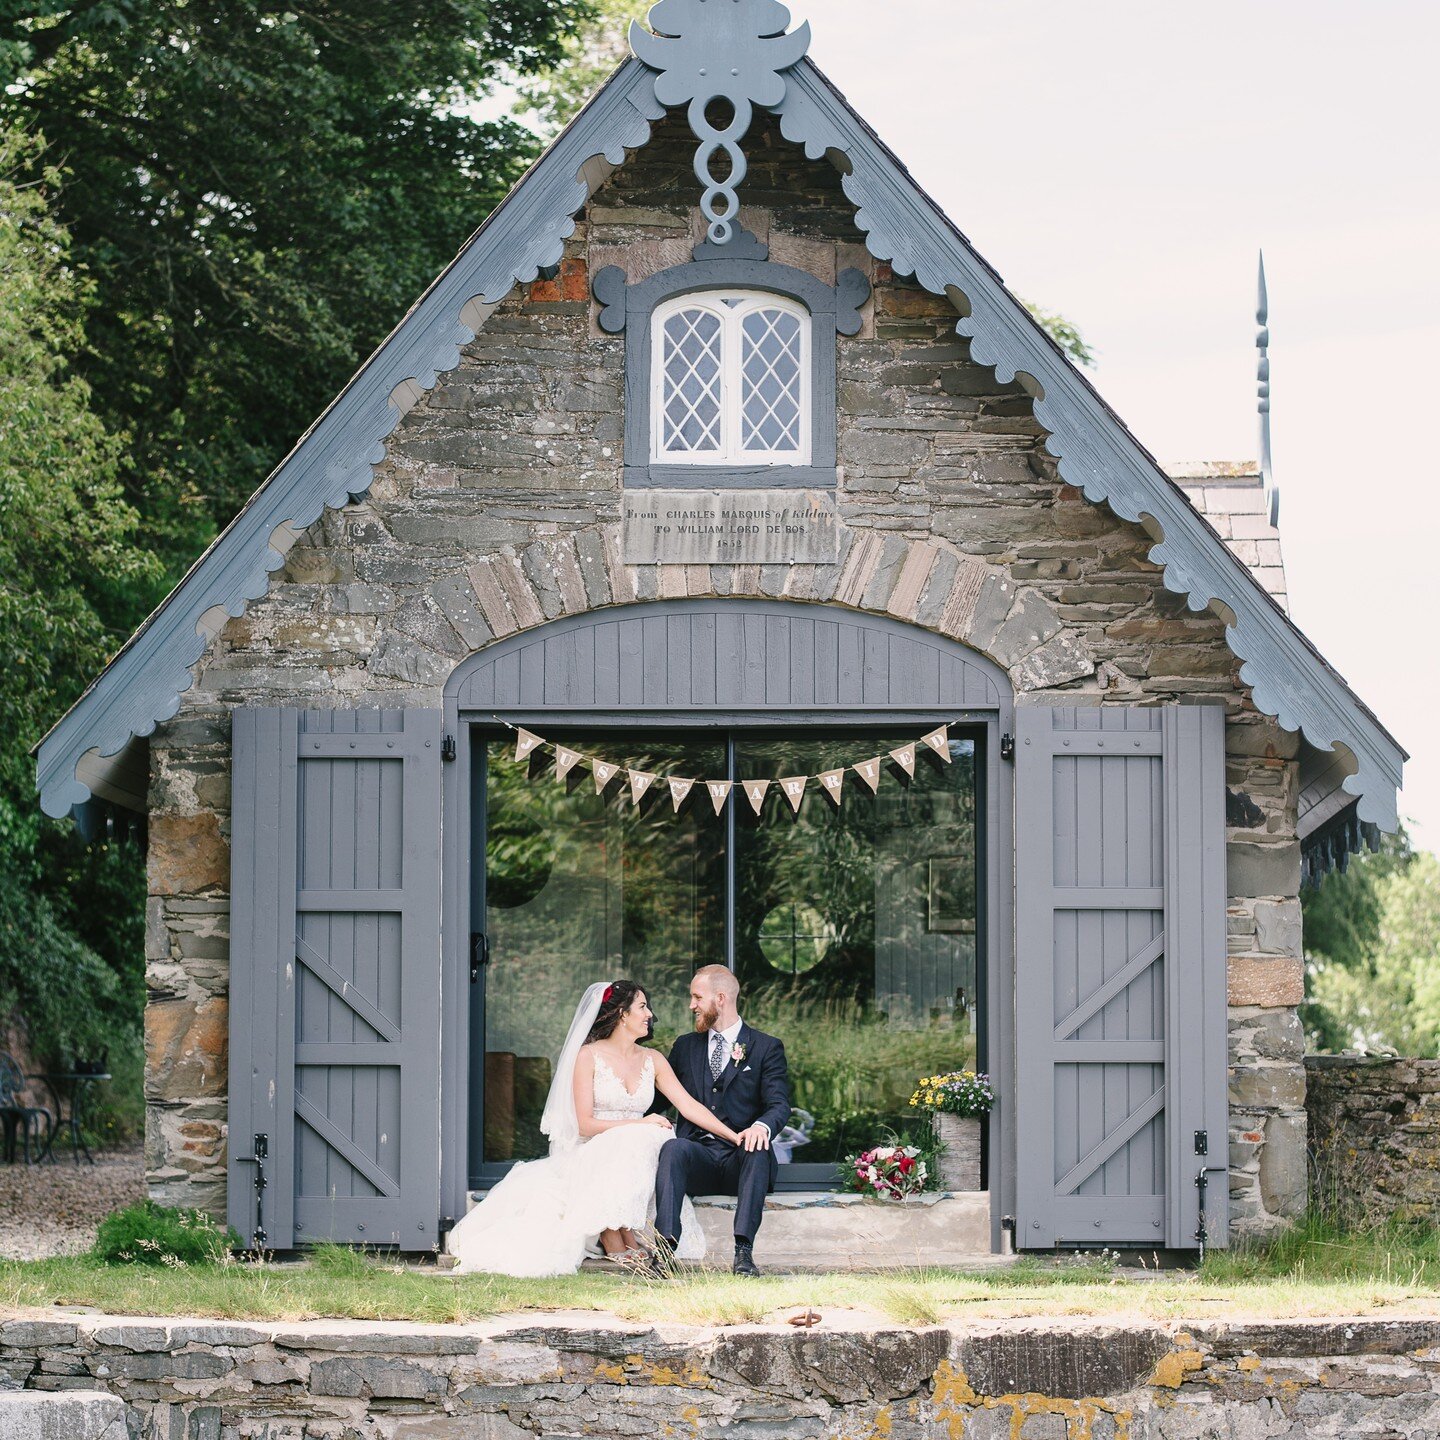 Getting excited about an upcoming wedding at @oldcourtweddingcompany in Strangford, Co. Down.

This is Rachael and Greg at the boathouse a few years ago.

Claire's ancestors were boatbuilders at Old Court. Flick through to see them in the exact same 